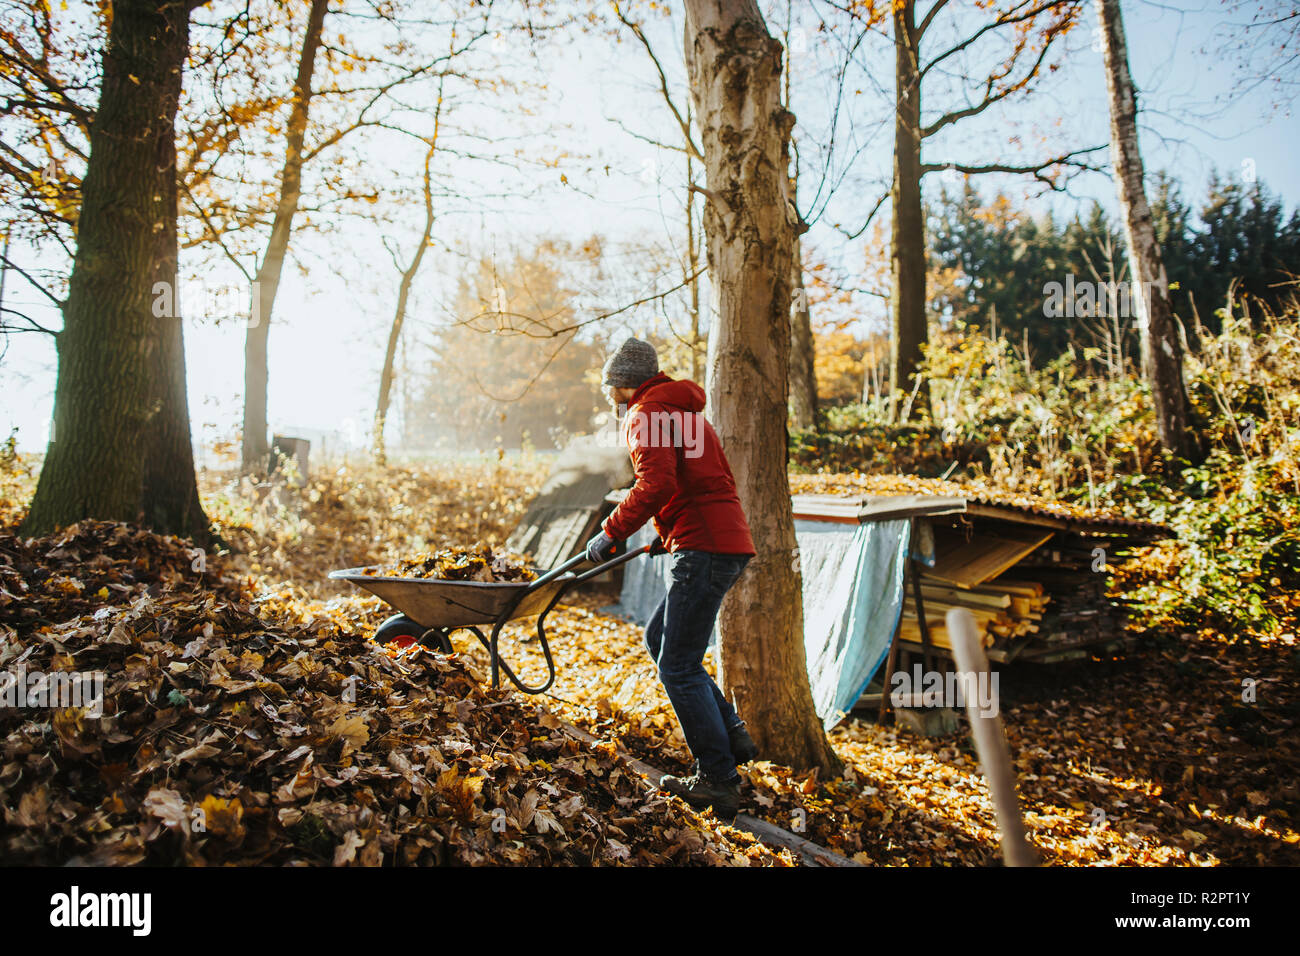 photo of caucasian man wearing a red jacket who is pushing a wheelbarrow full of leaves up a pile of foliage Stock Photo